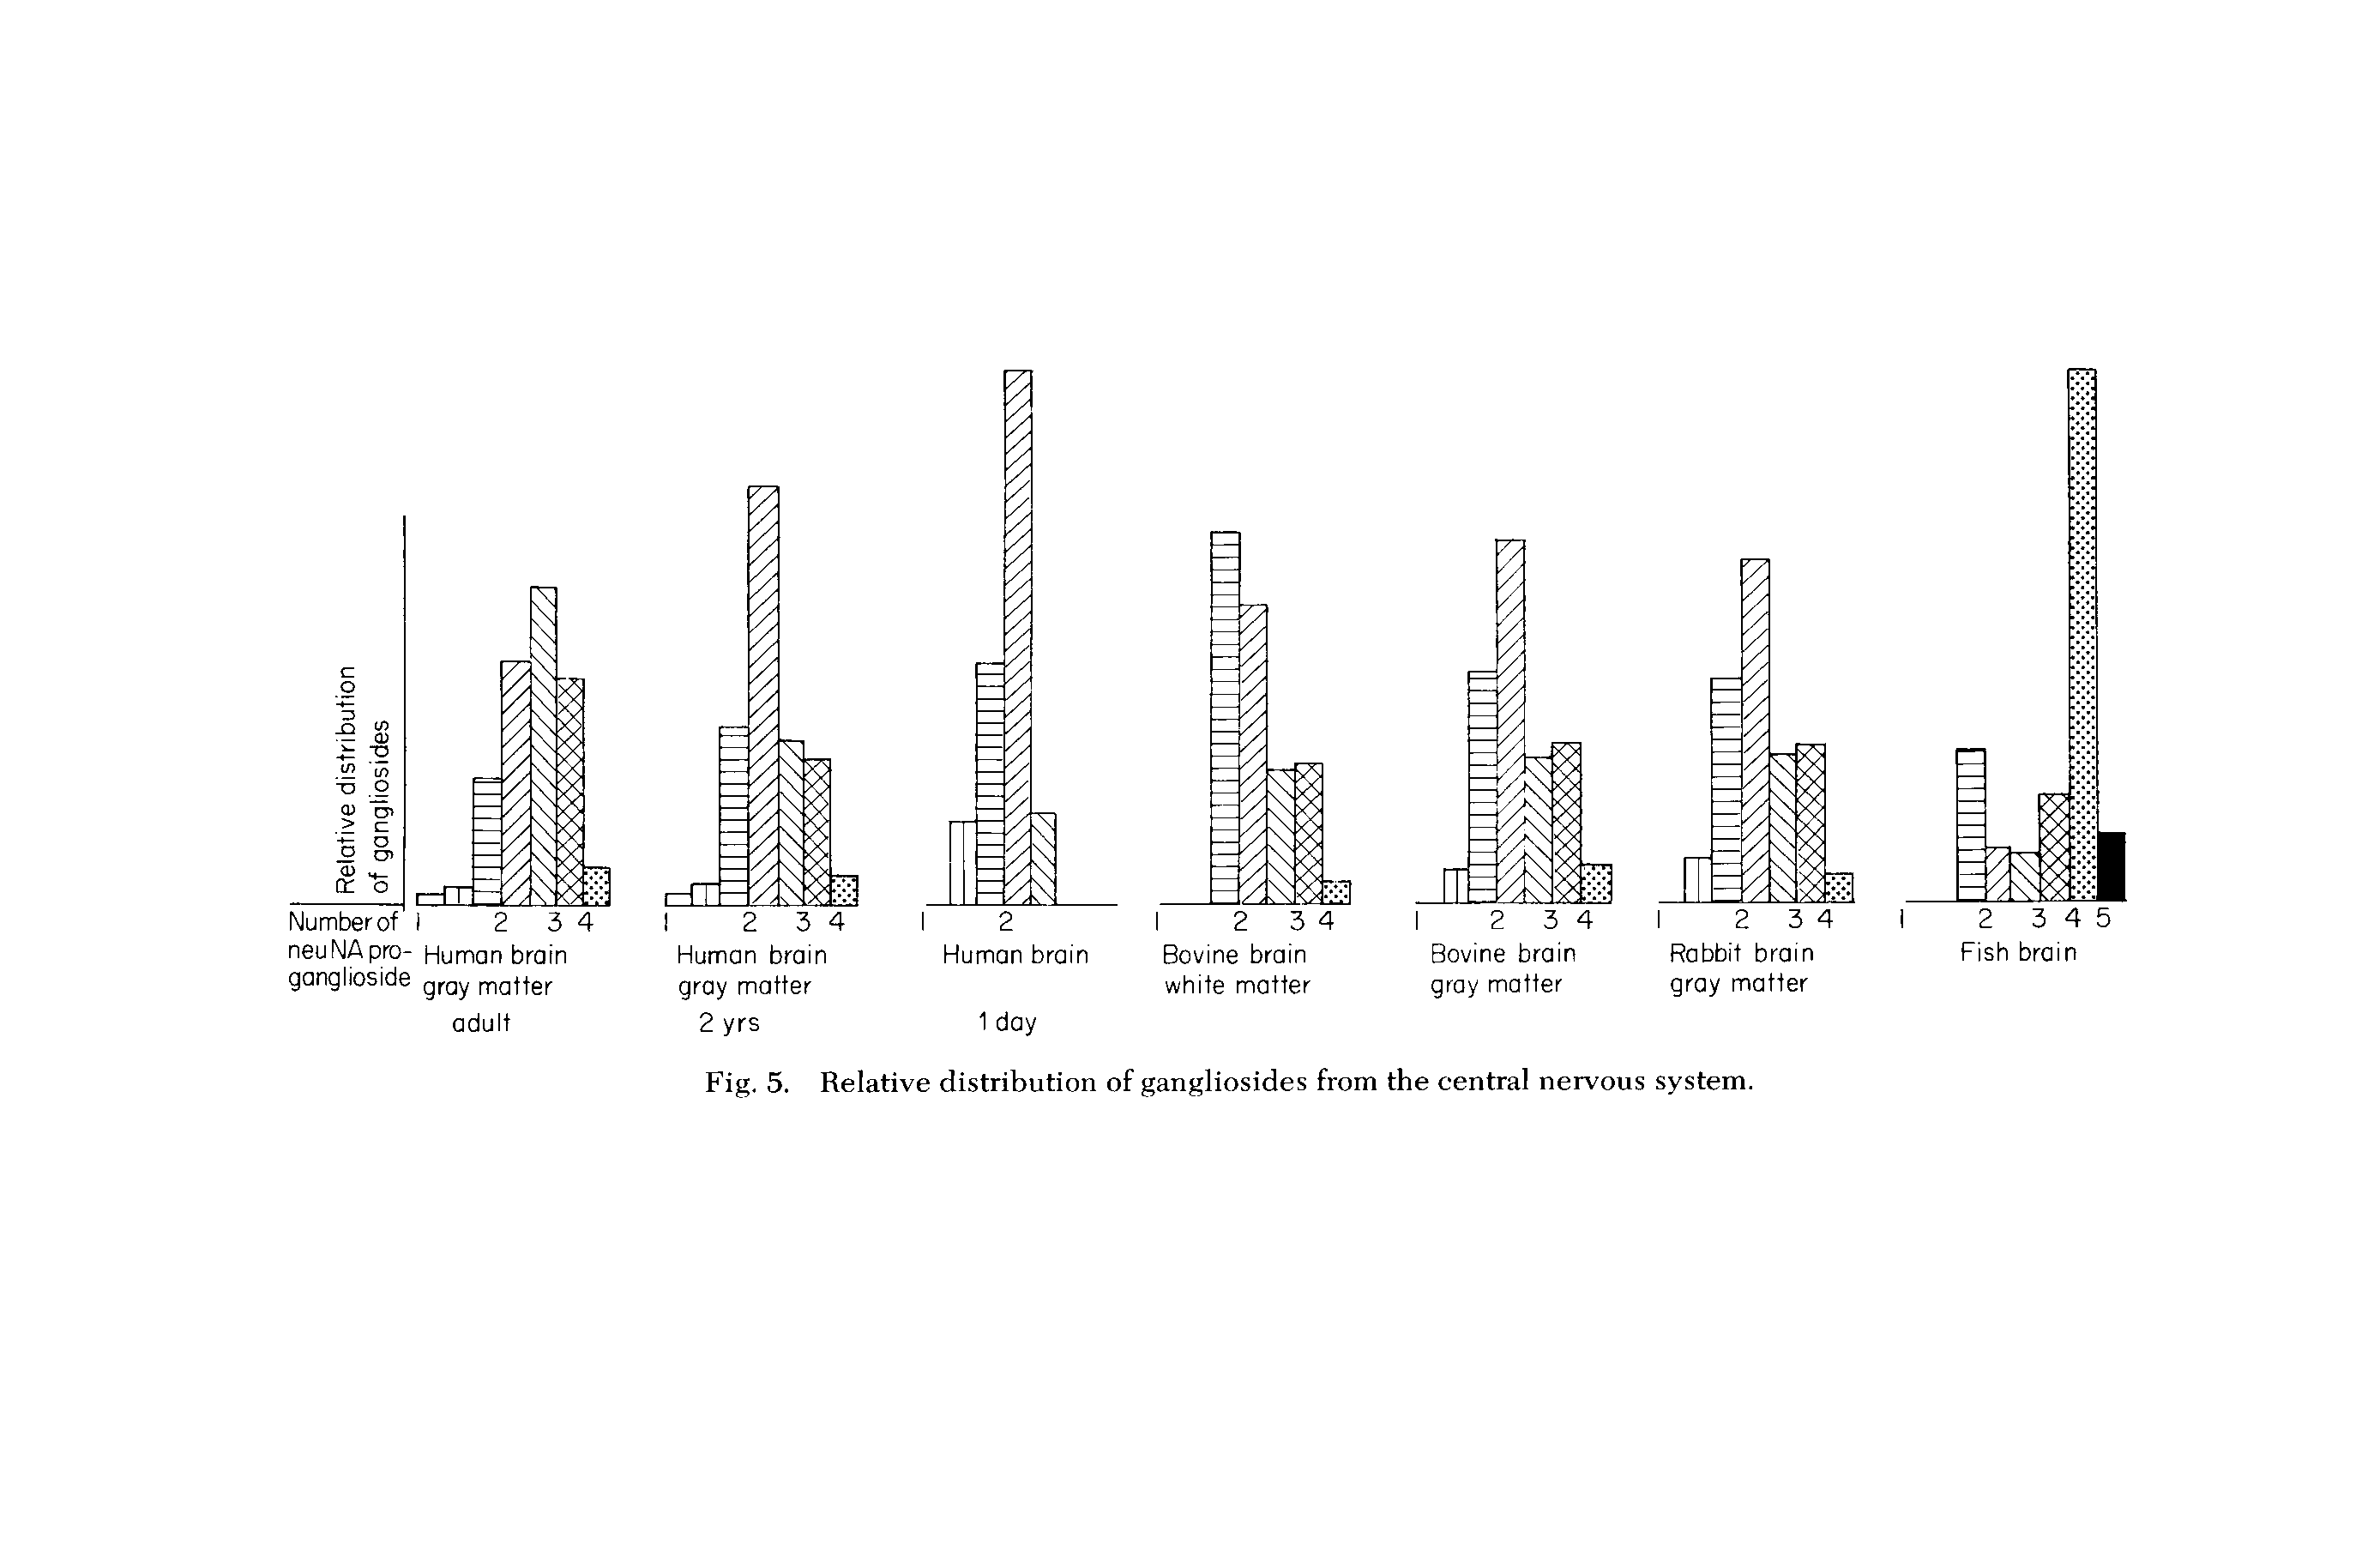 Fig. 5. Relative distribution of gangliosides from the central nervous system.